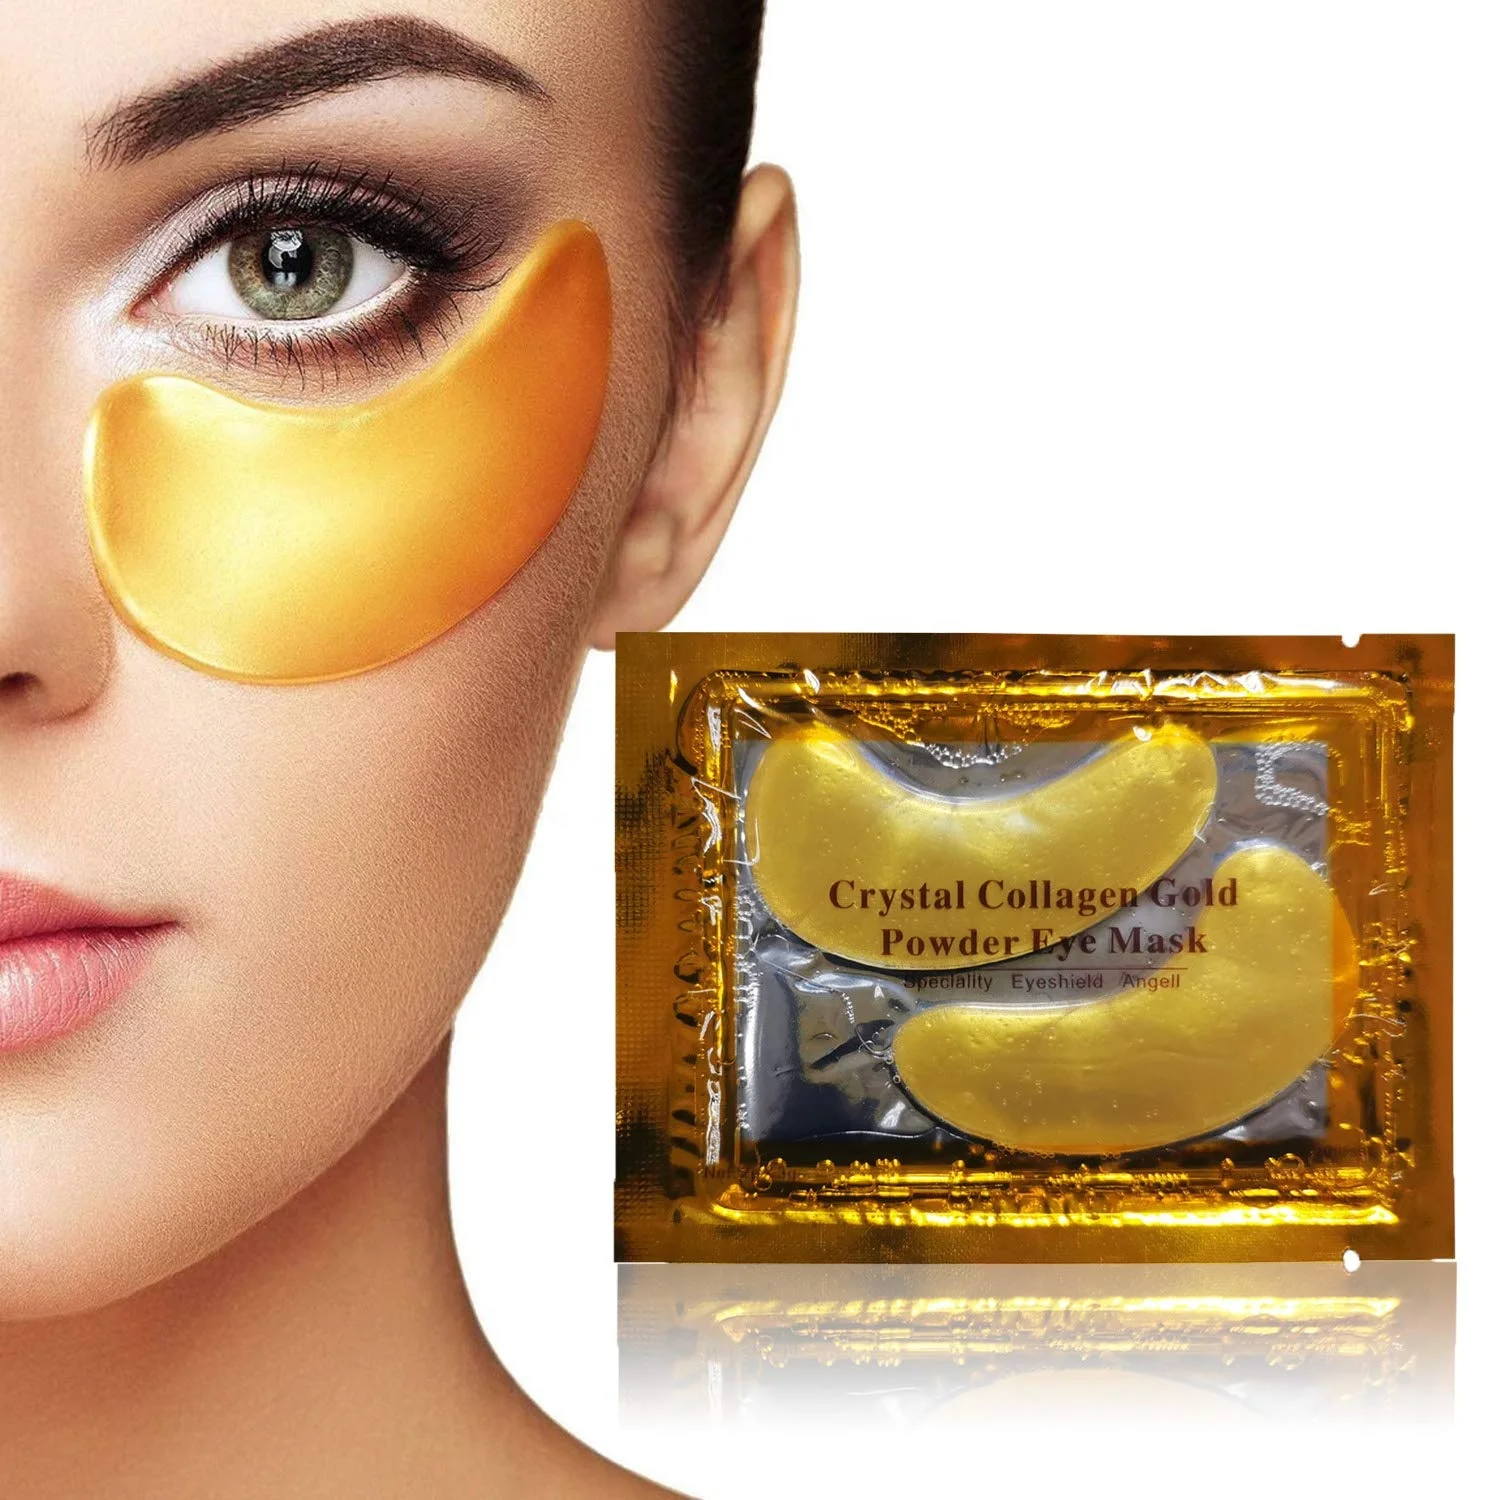 

24K Gold Collagen Under Eye Mask, Crystal Power Gel Collagen Eye Patches, Great For Anti Aging, Dark Circles & Puffiness